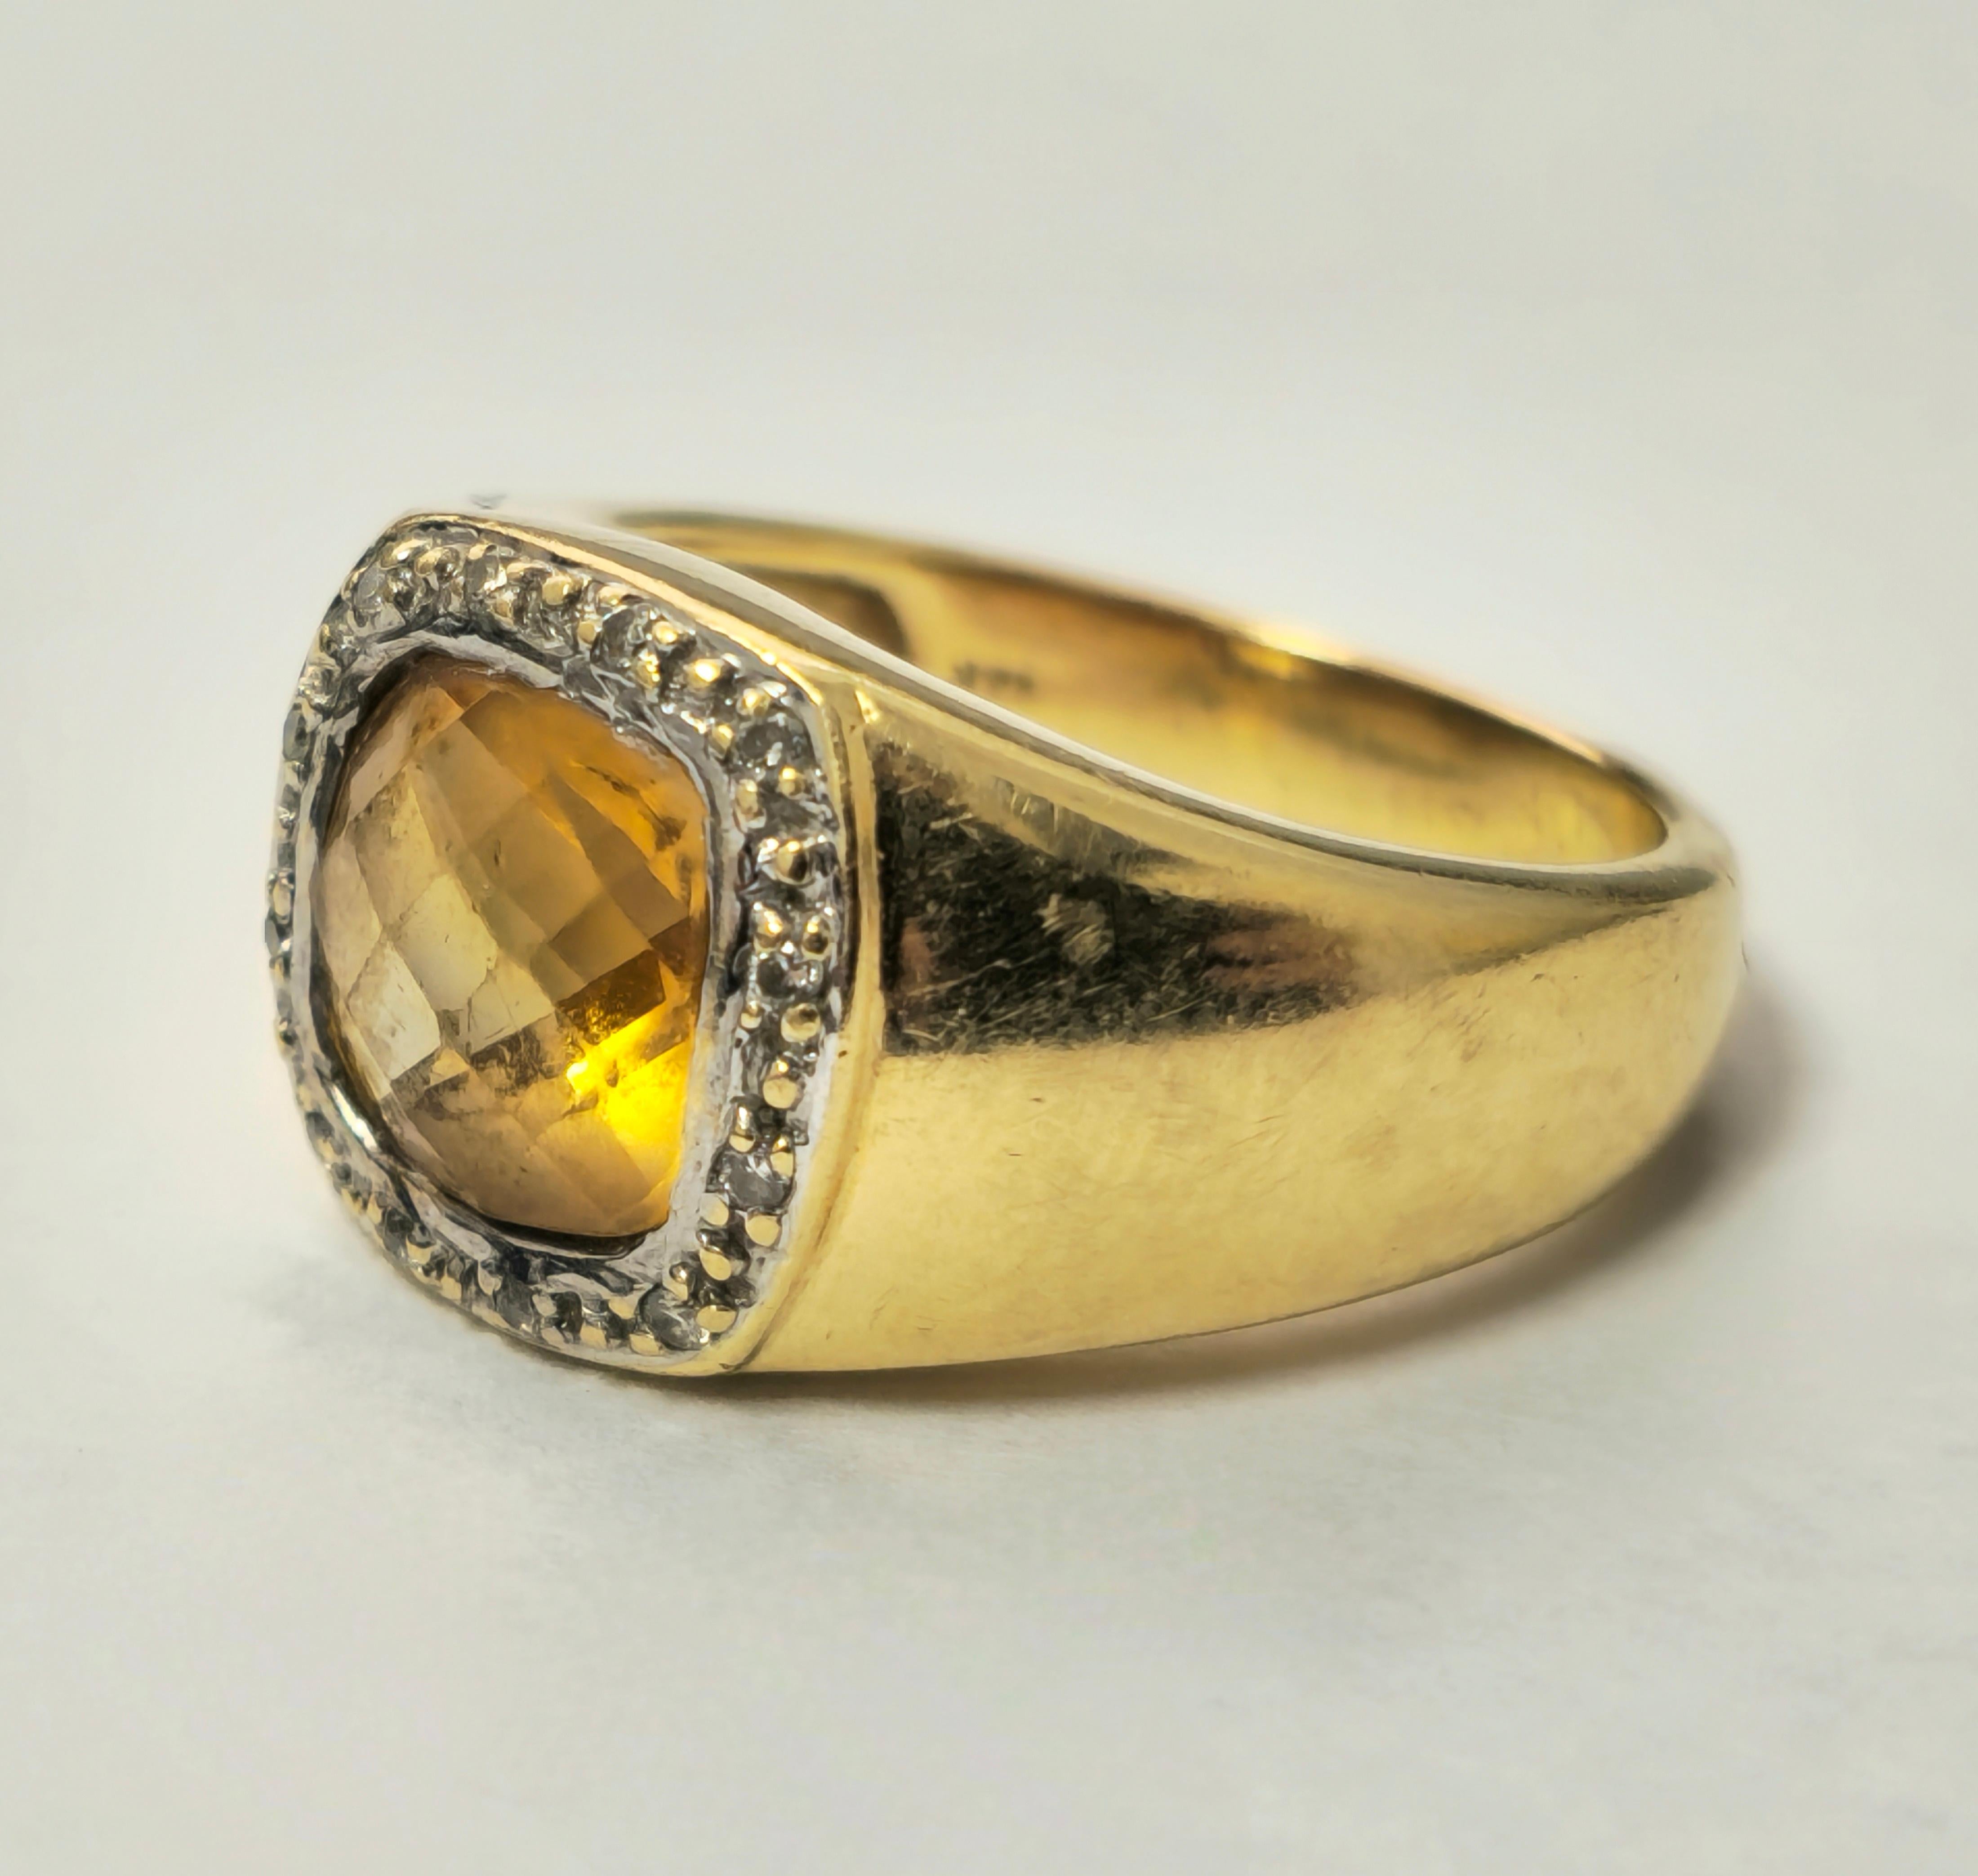 Fashioned from radiant 14k yellow gold, this exquisite ring features a mesmerizing centerpiece: a 4.90 carat yellow citrine, sourced directly from the earth, exuding warmth and elegance. Accompanying this stunning citrine are round-cut diamonds